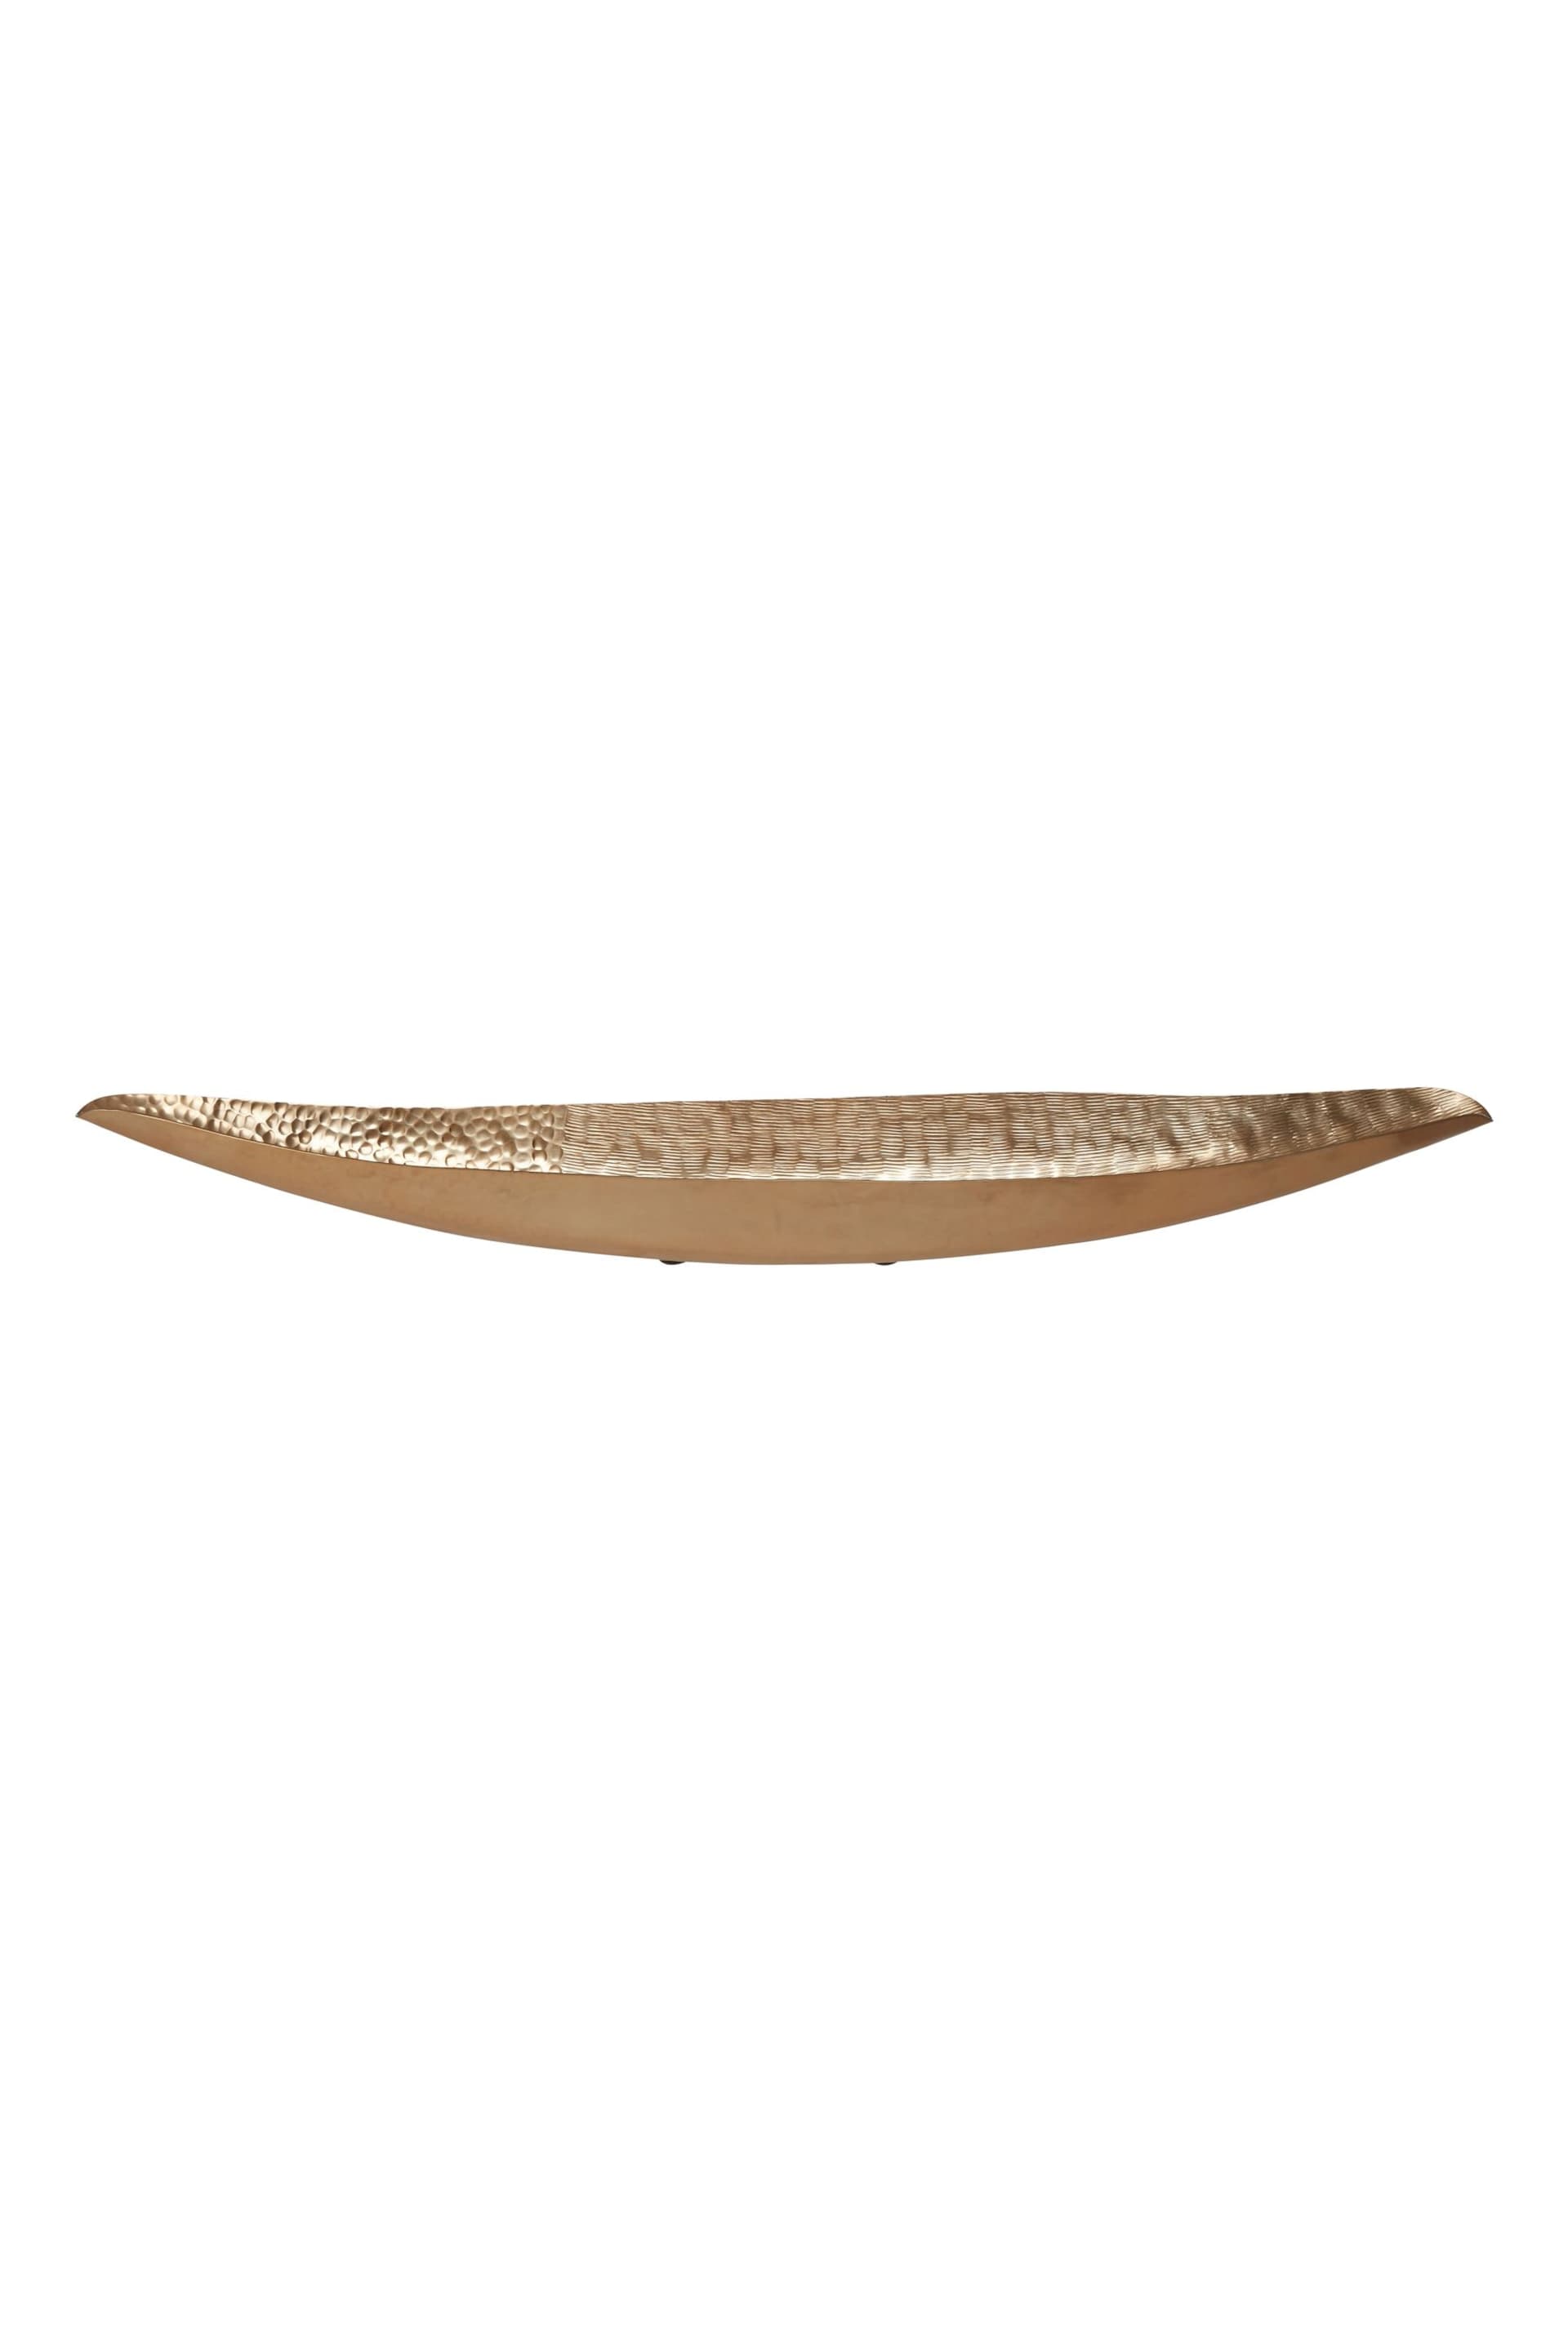 Fifty Five South Gold Solis Large Boat Dish - Image 2 of 4